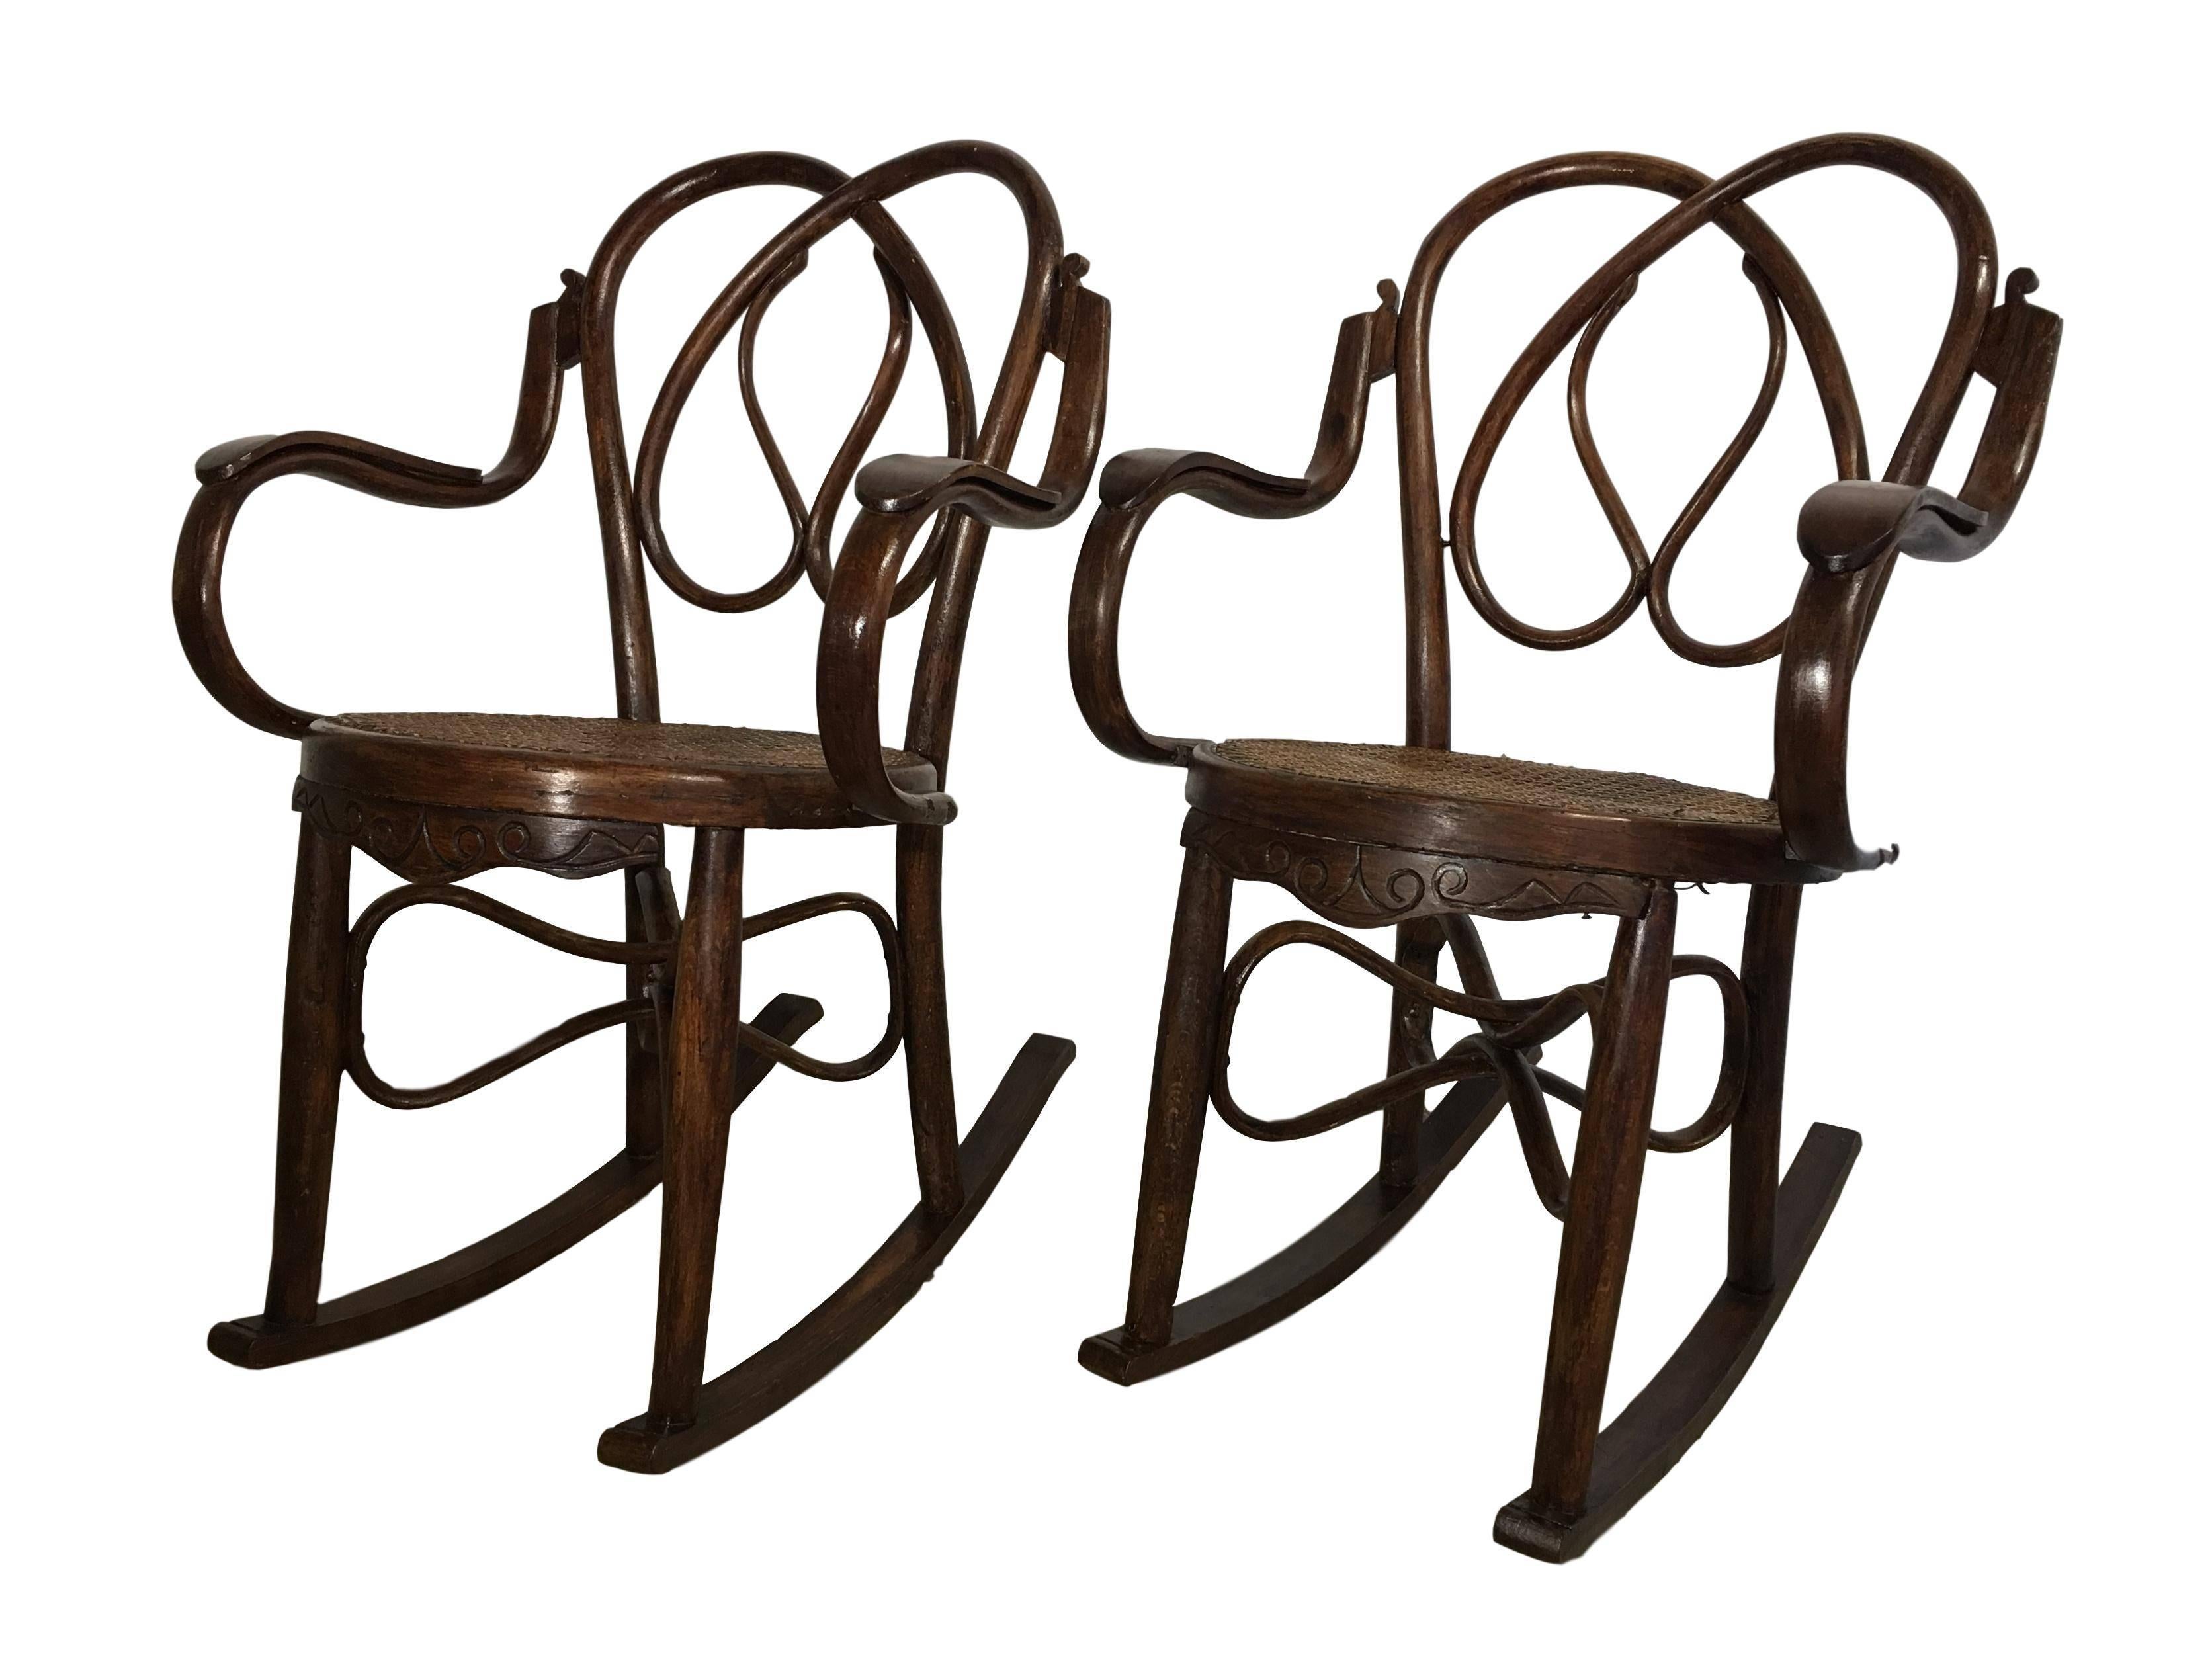 19th century pair of bentwood rocking chairs in the style of Jacob & Josef.